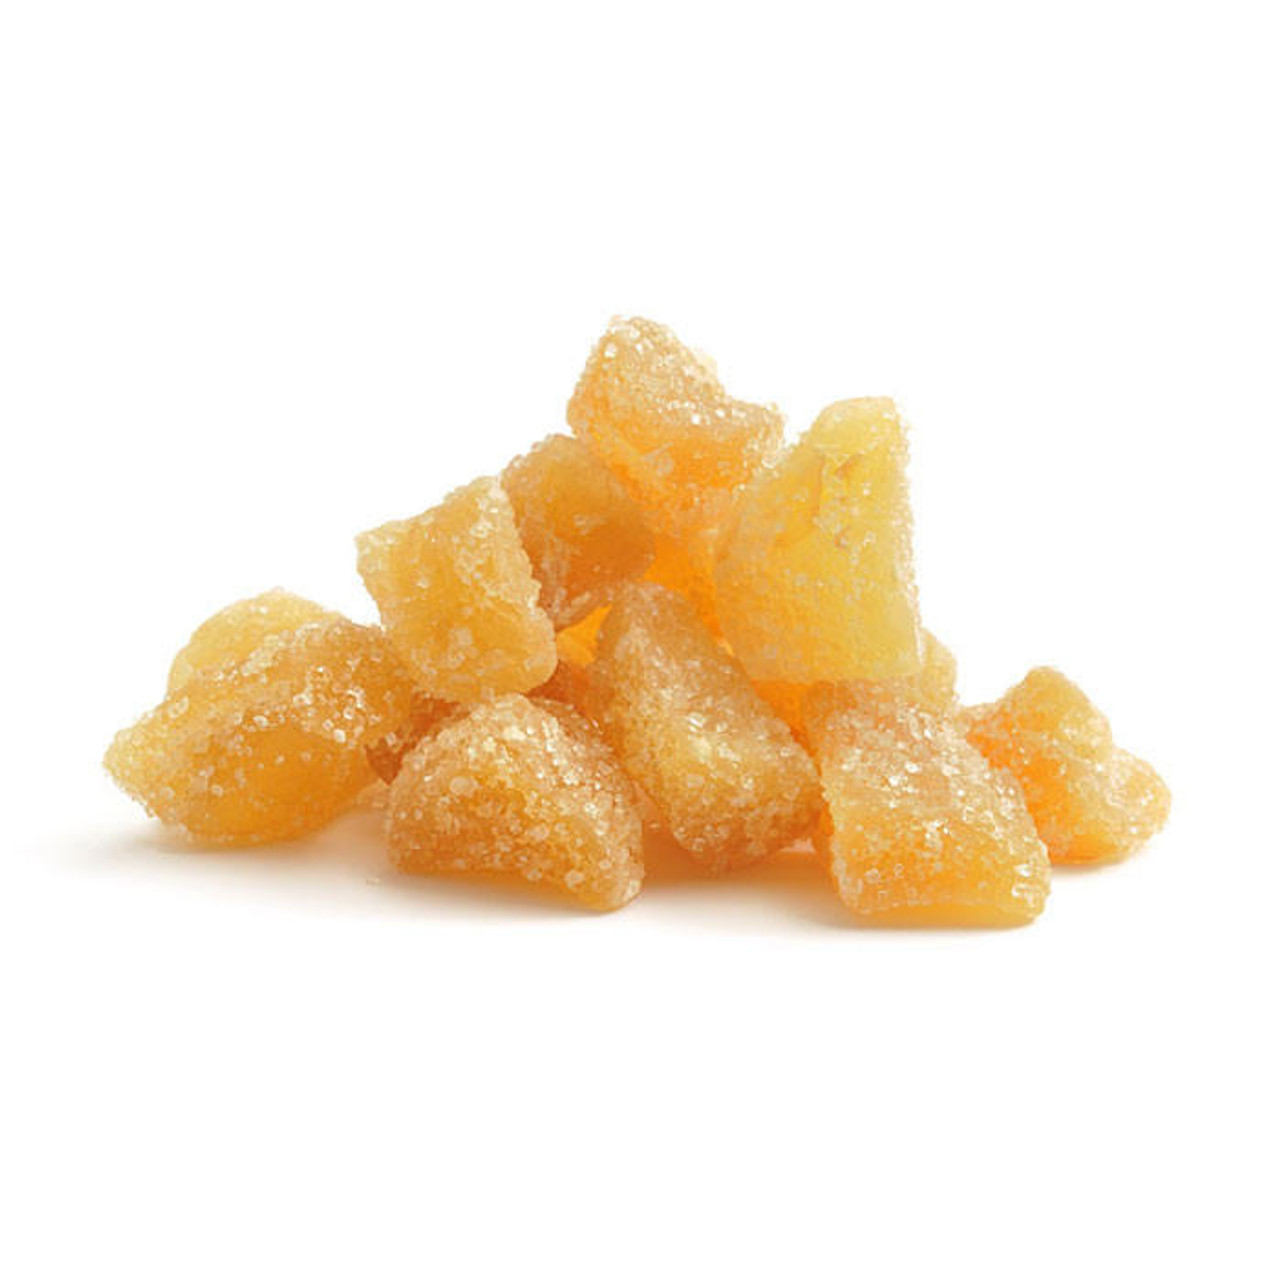 Dried Crystallized Ginger Chunks 200g The Gourmet Warehouse 1207